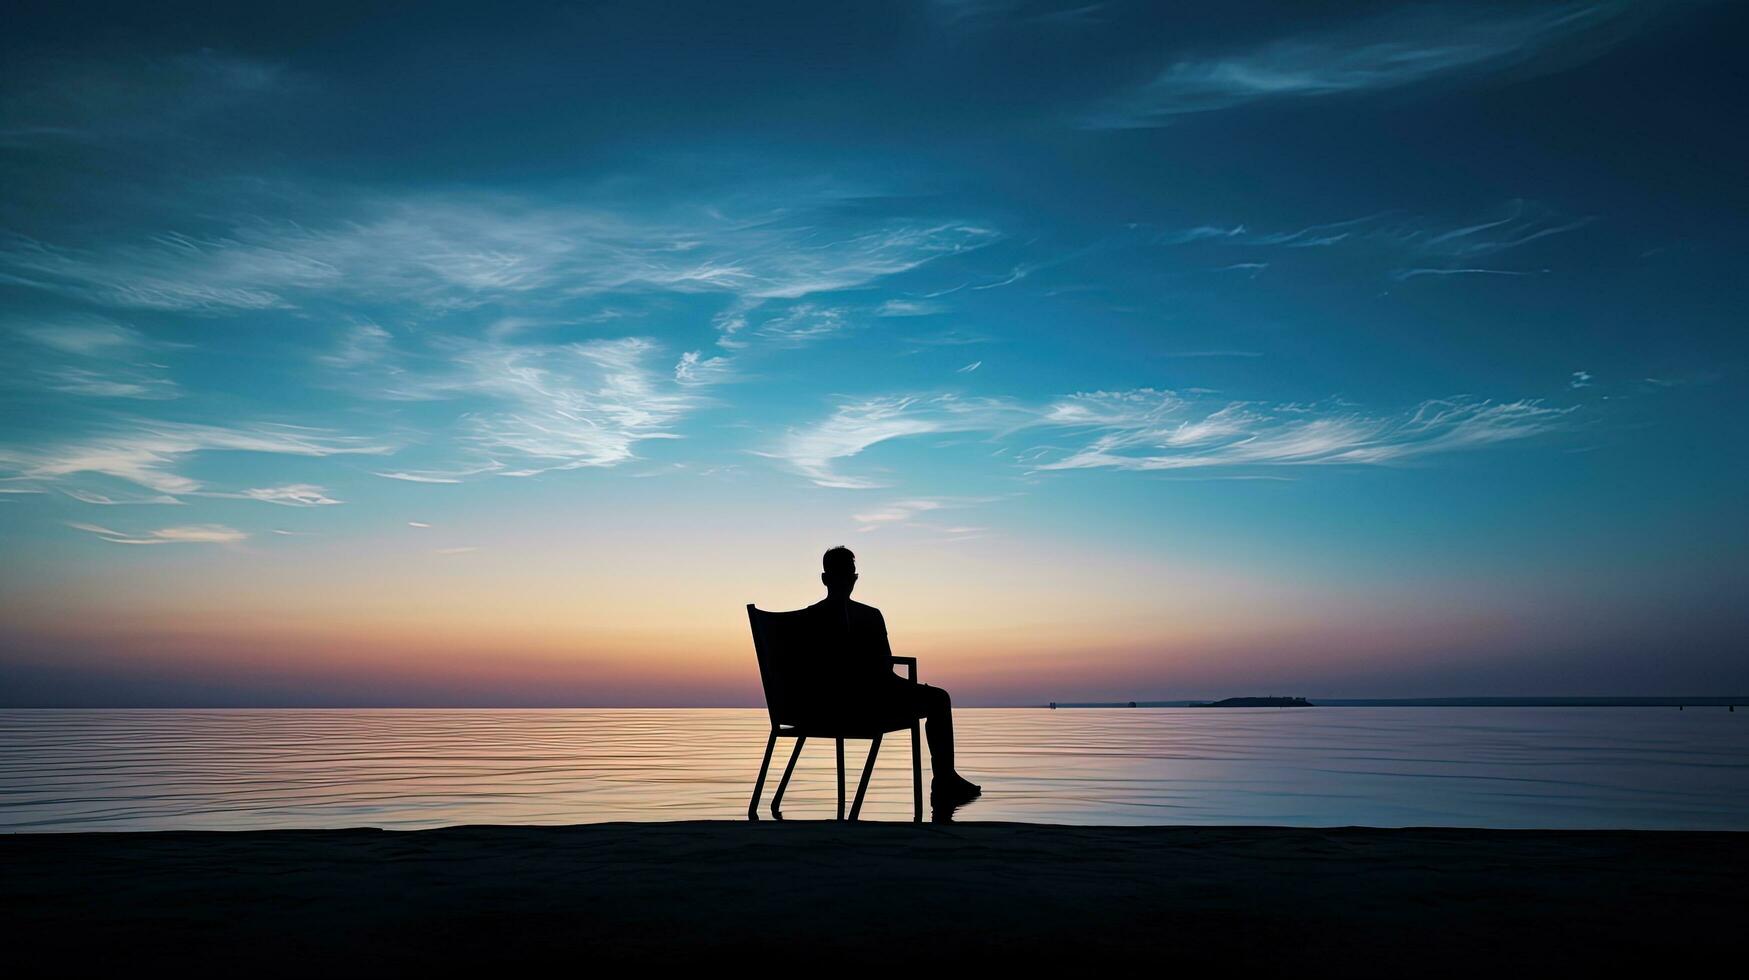 The man seated seaside. silhouette concept photo